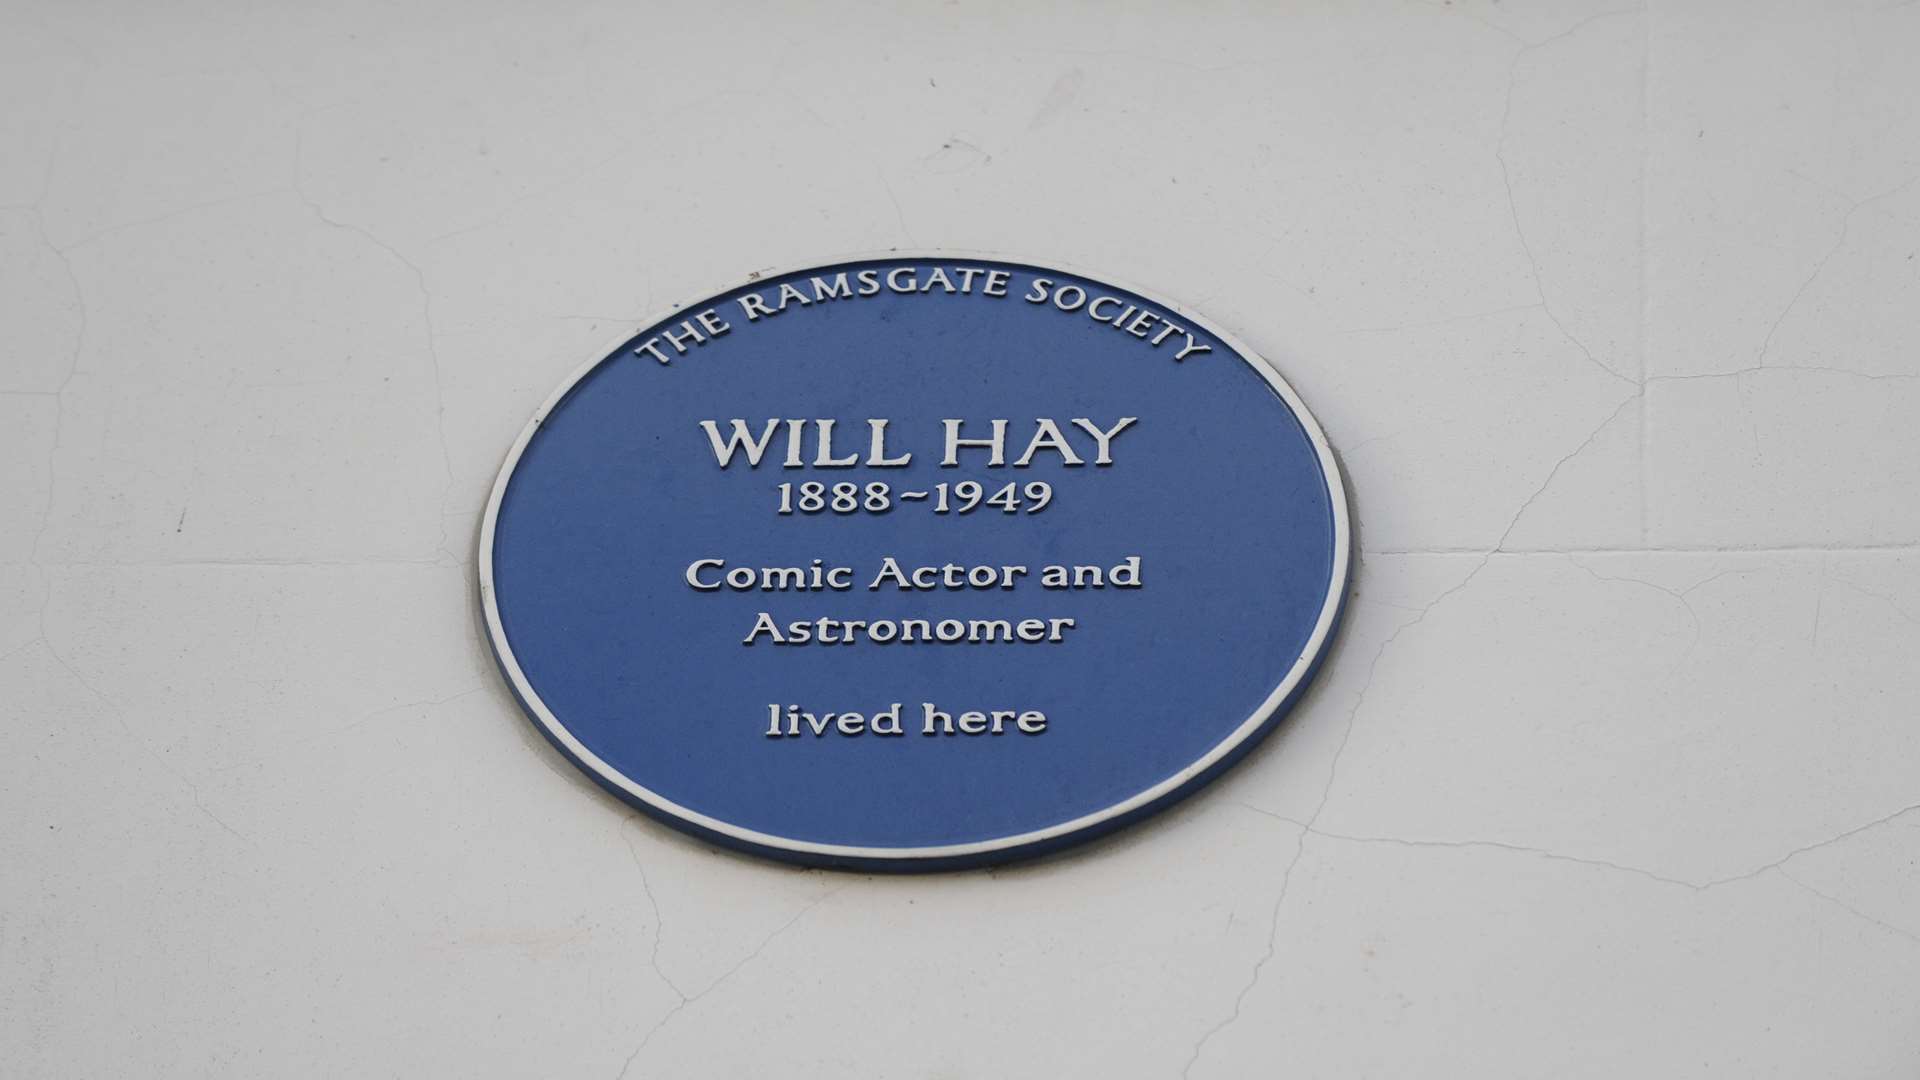 Will Hay, Guilford Lawn, Ramsgate